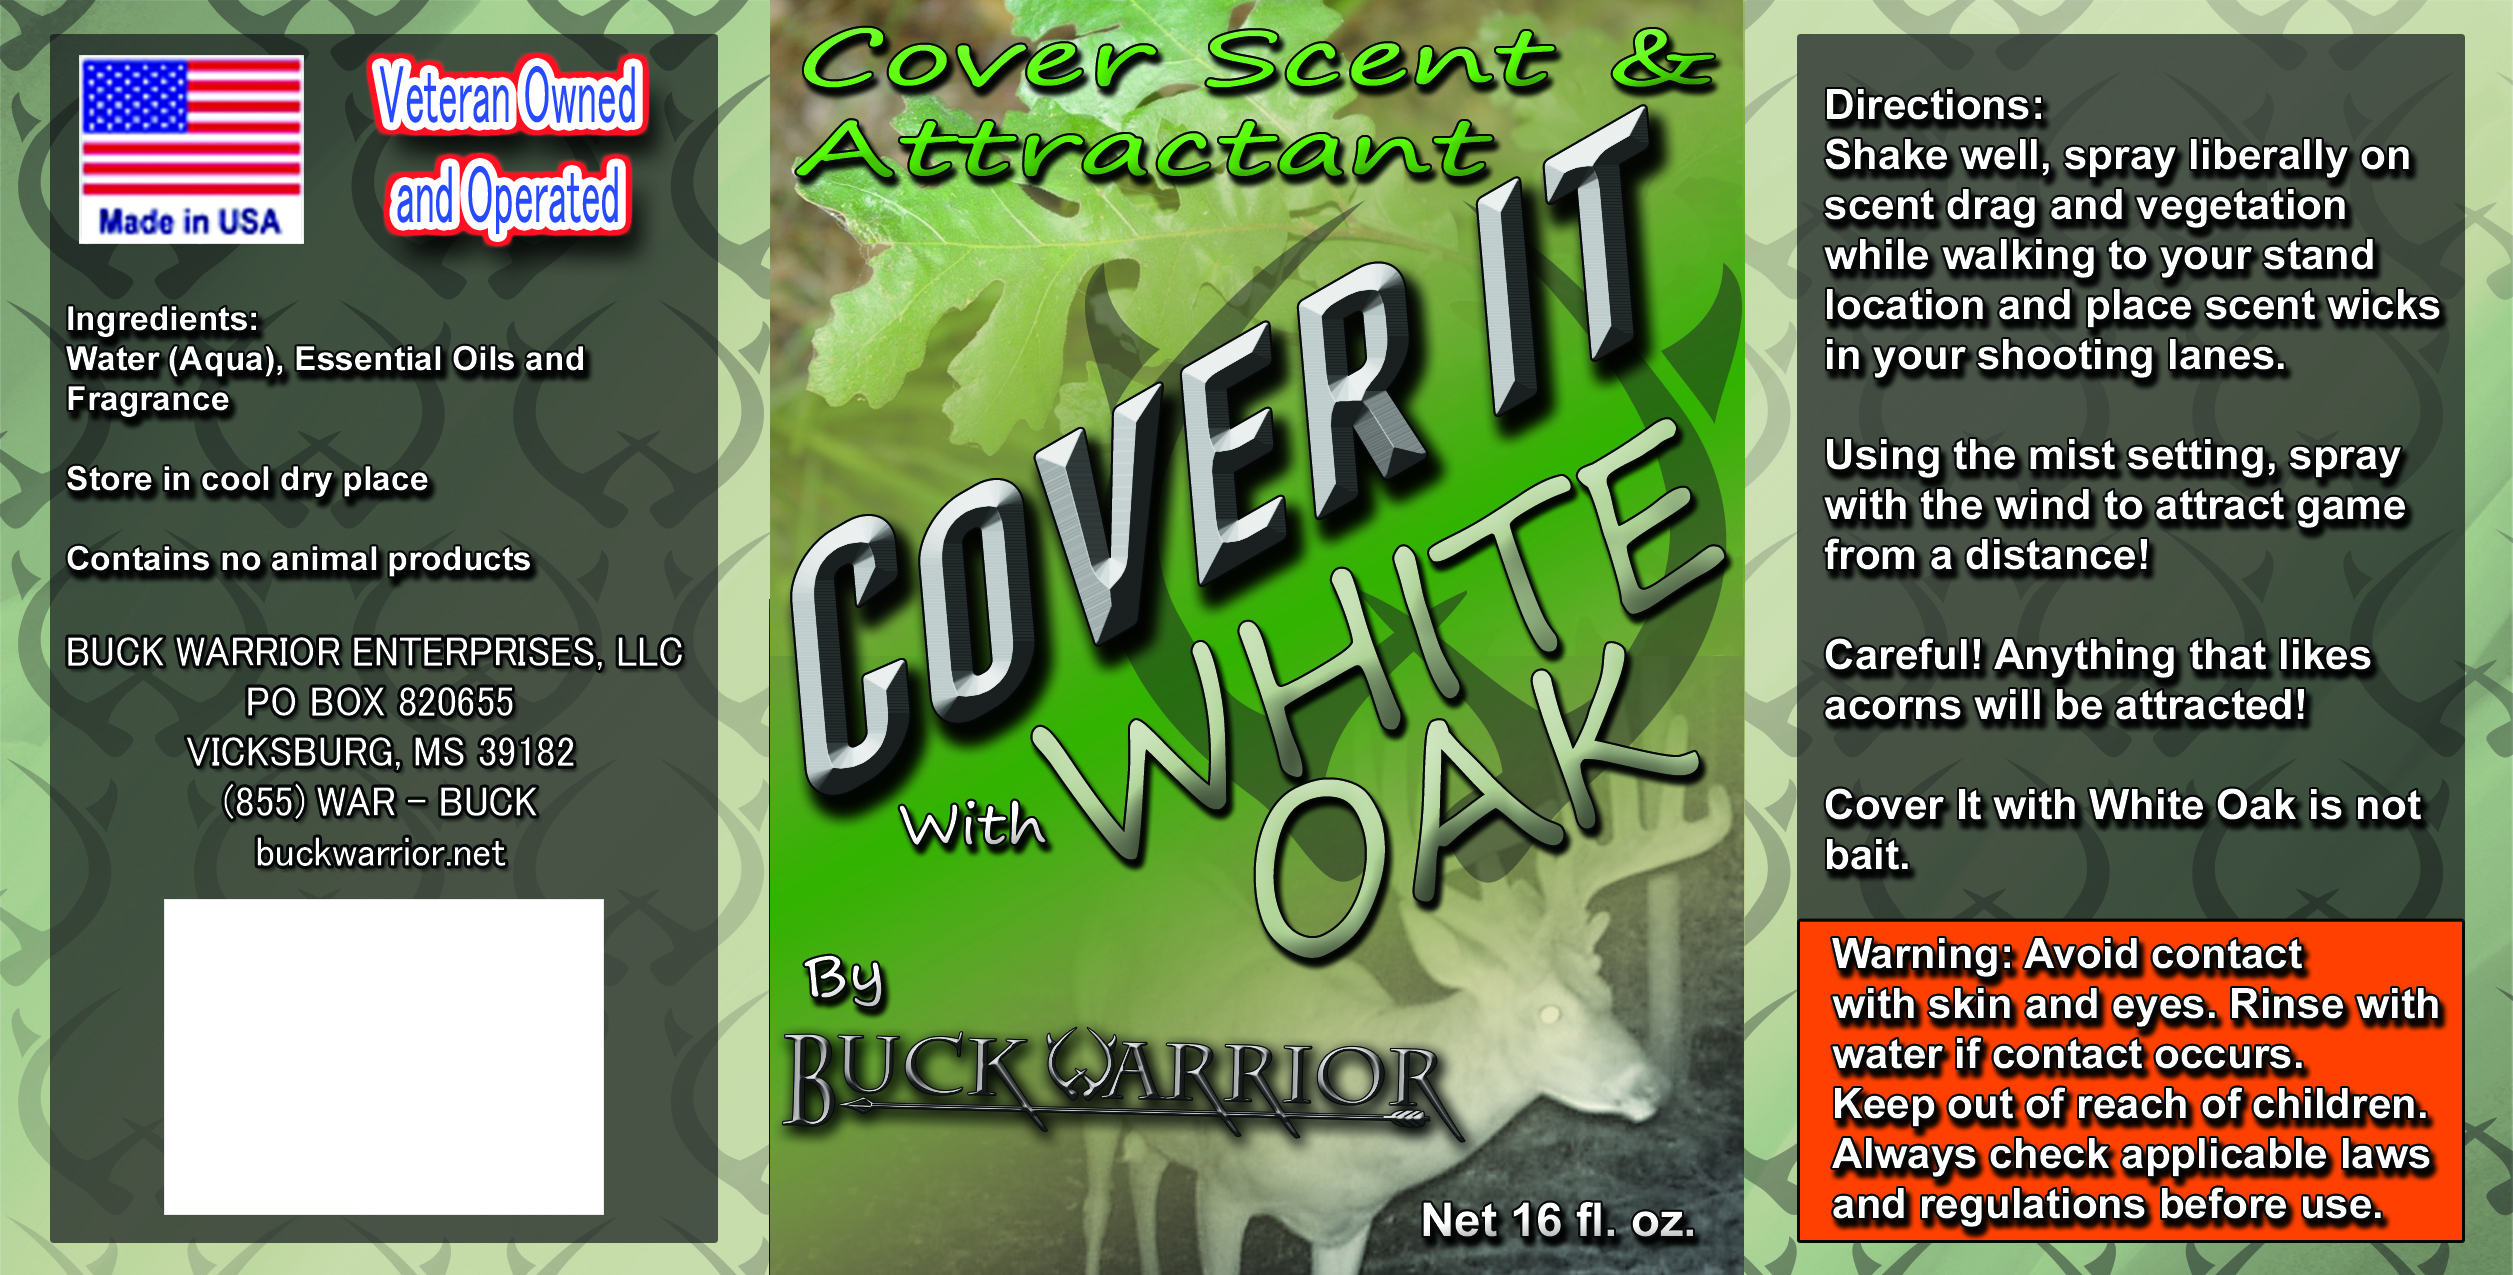 Cover It with White Oak